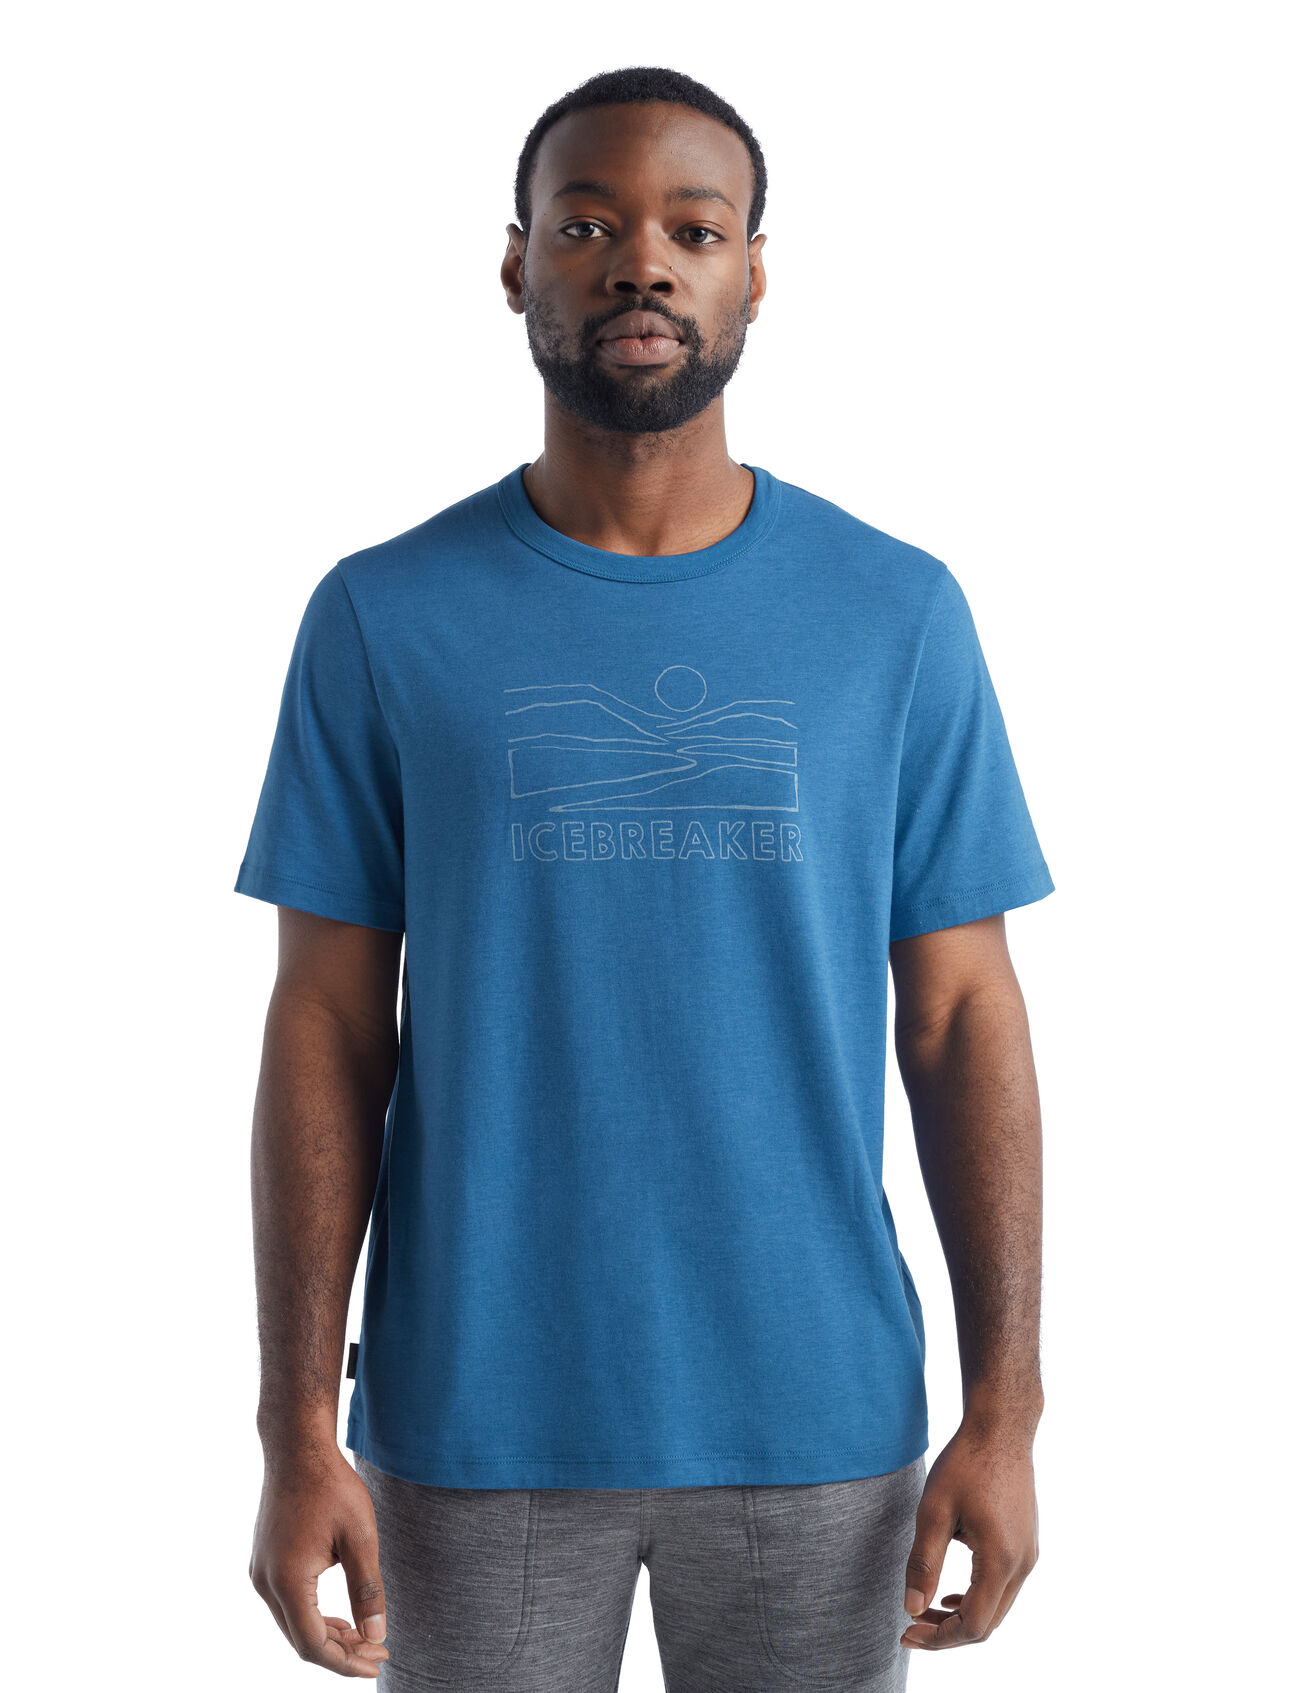 Mens Merino Central Short Sleeve T-Shirt icebreaker Sunset A versatile, everyday tee featuring original logo artwork, the Central Short Sleeve Tee icebreaker Sunset features a sustainable blend of natural merino wool and soft organic cotton. Original graphic artwork draws inspiration from the calm, awe-inspiring moments before the sun goes down. 